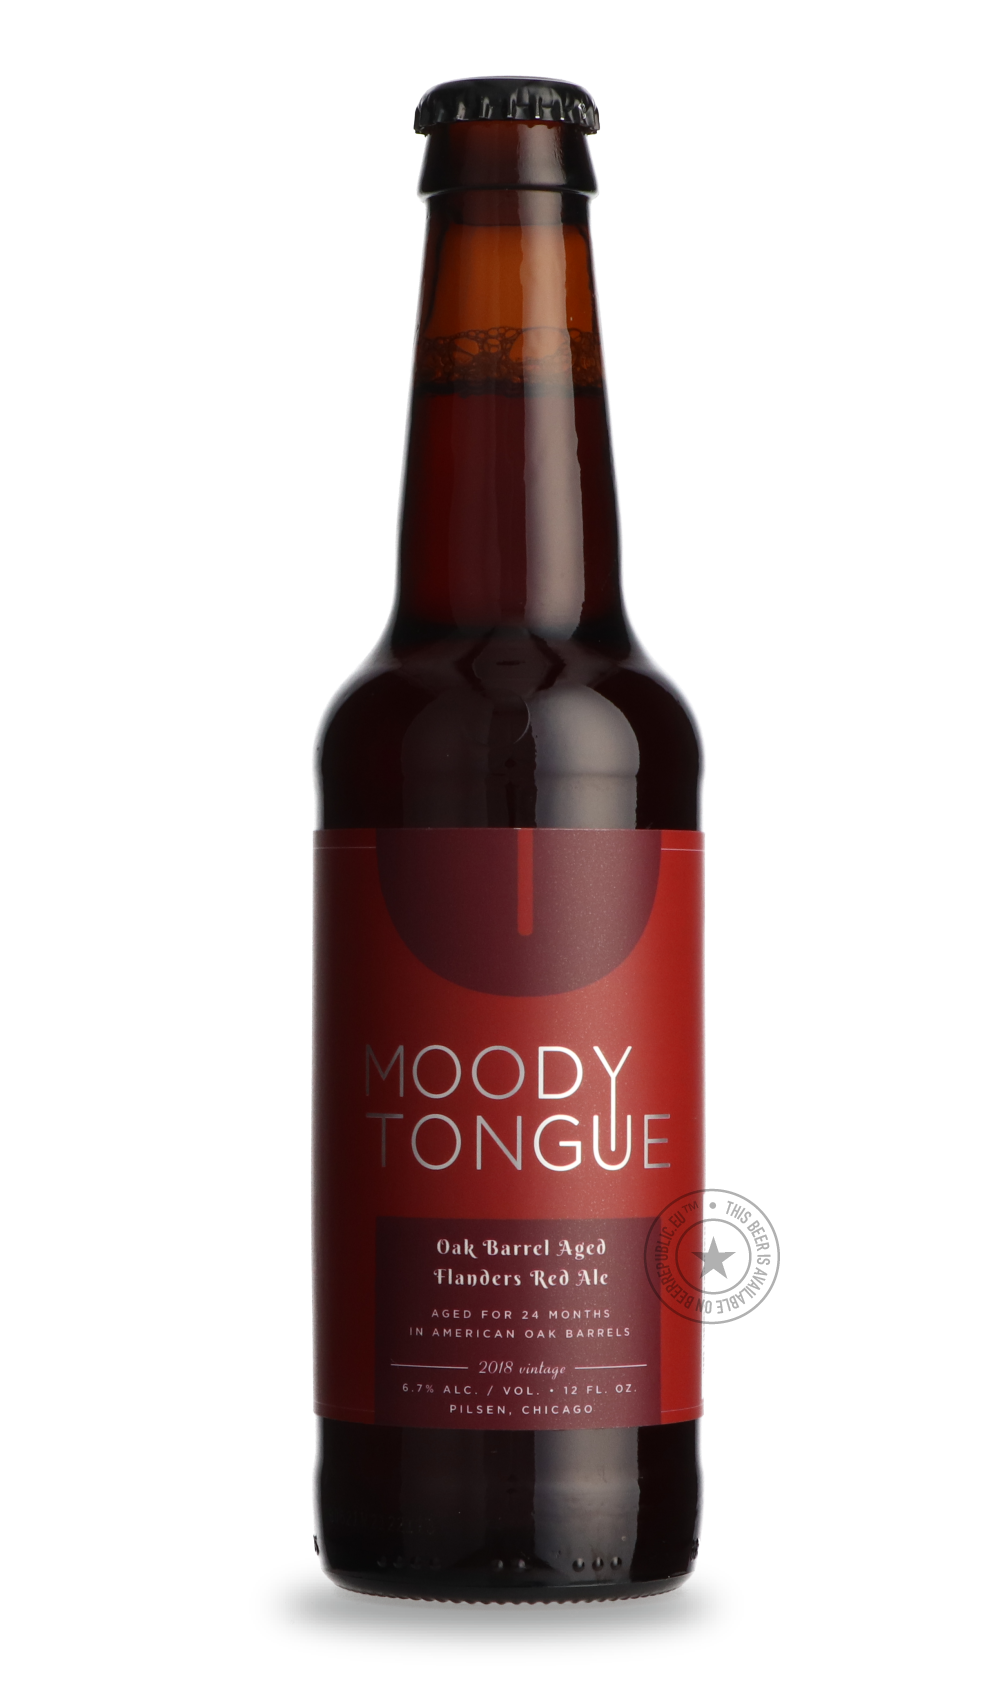 -Moody Tongue- Oak Barrel Aged Flanders Red Ale-Sour / Wild & Fruity- Only @ Beer Republic - The best online beer store for American & Canadian craft beer - Buy beer online from the USA and Canada - Bier online kopen - Amerikaans bier kopen - Craft beer store - Craft beer kopen - Amerikanisch bier kaufen - Bier online kaufen - Acheter biere online - IPA - Stout - Porter - New England IPA - Hazy IPA - Imperial Stout - Barrel Aged - Barrel Aged Imperial Stout - Brown - Dark beer - Blond - Blonde - Pilsner - L